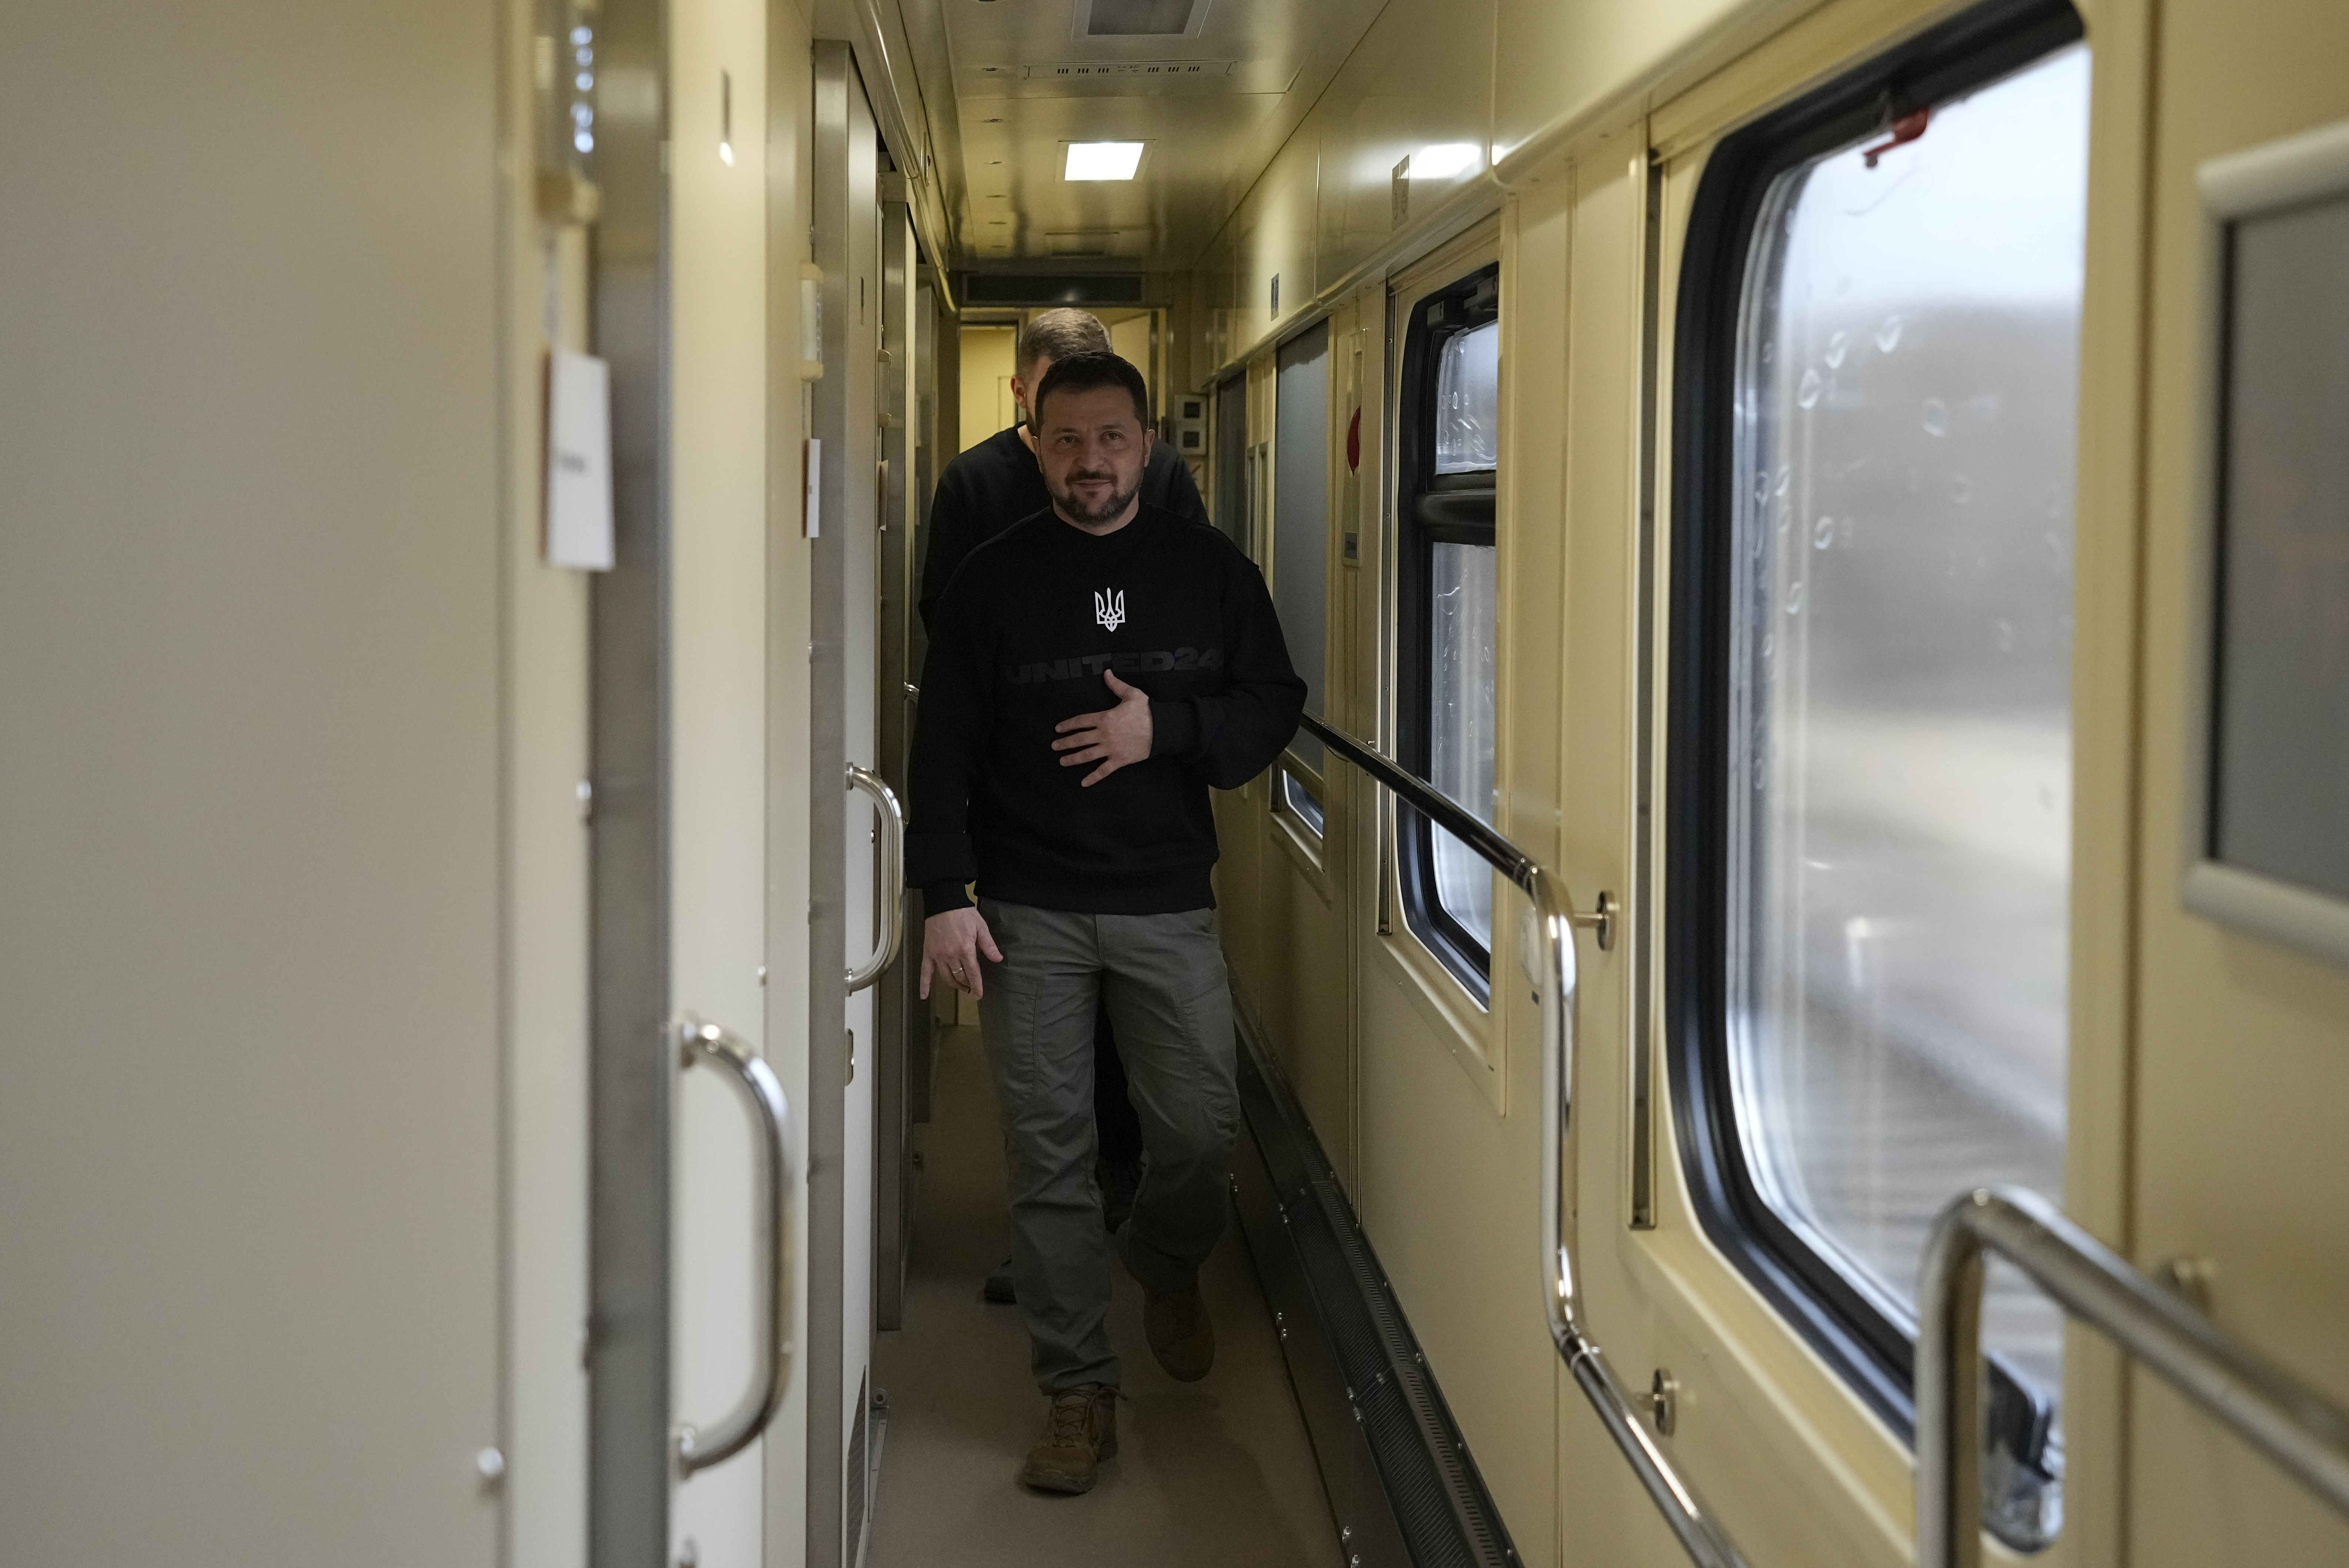 Ukraine's President Volodymyr Zelenskyy walks down a corridor upon his arrival for an interview with The Associated Press on a train en route from the Sumy region to Kiev, Ukraine, Tuesday, March 28, 2023. (AP Photo/Efrem Lukatsky )